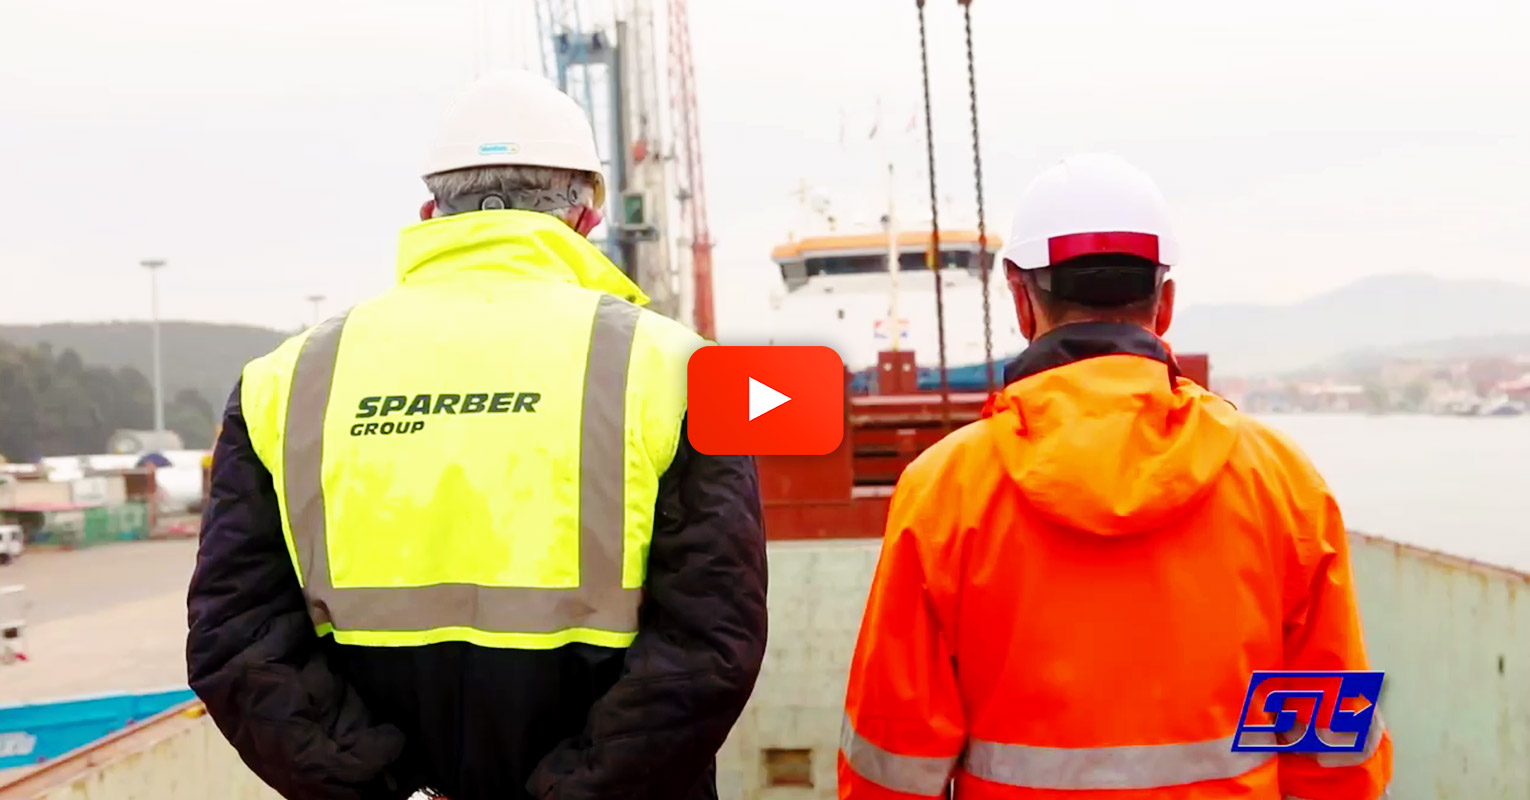 Video - Sparber Group Shipped 44 Packages Totaling 428 Tons and 1595 cbm from Aviles, Spain to Vuosaari, Finland